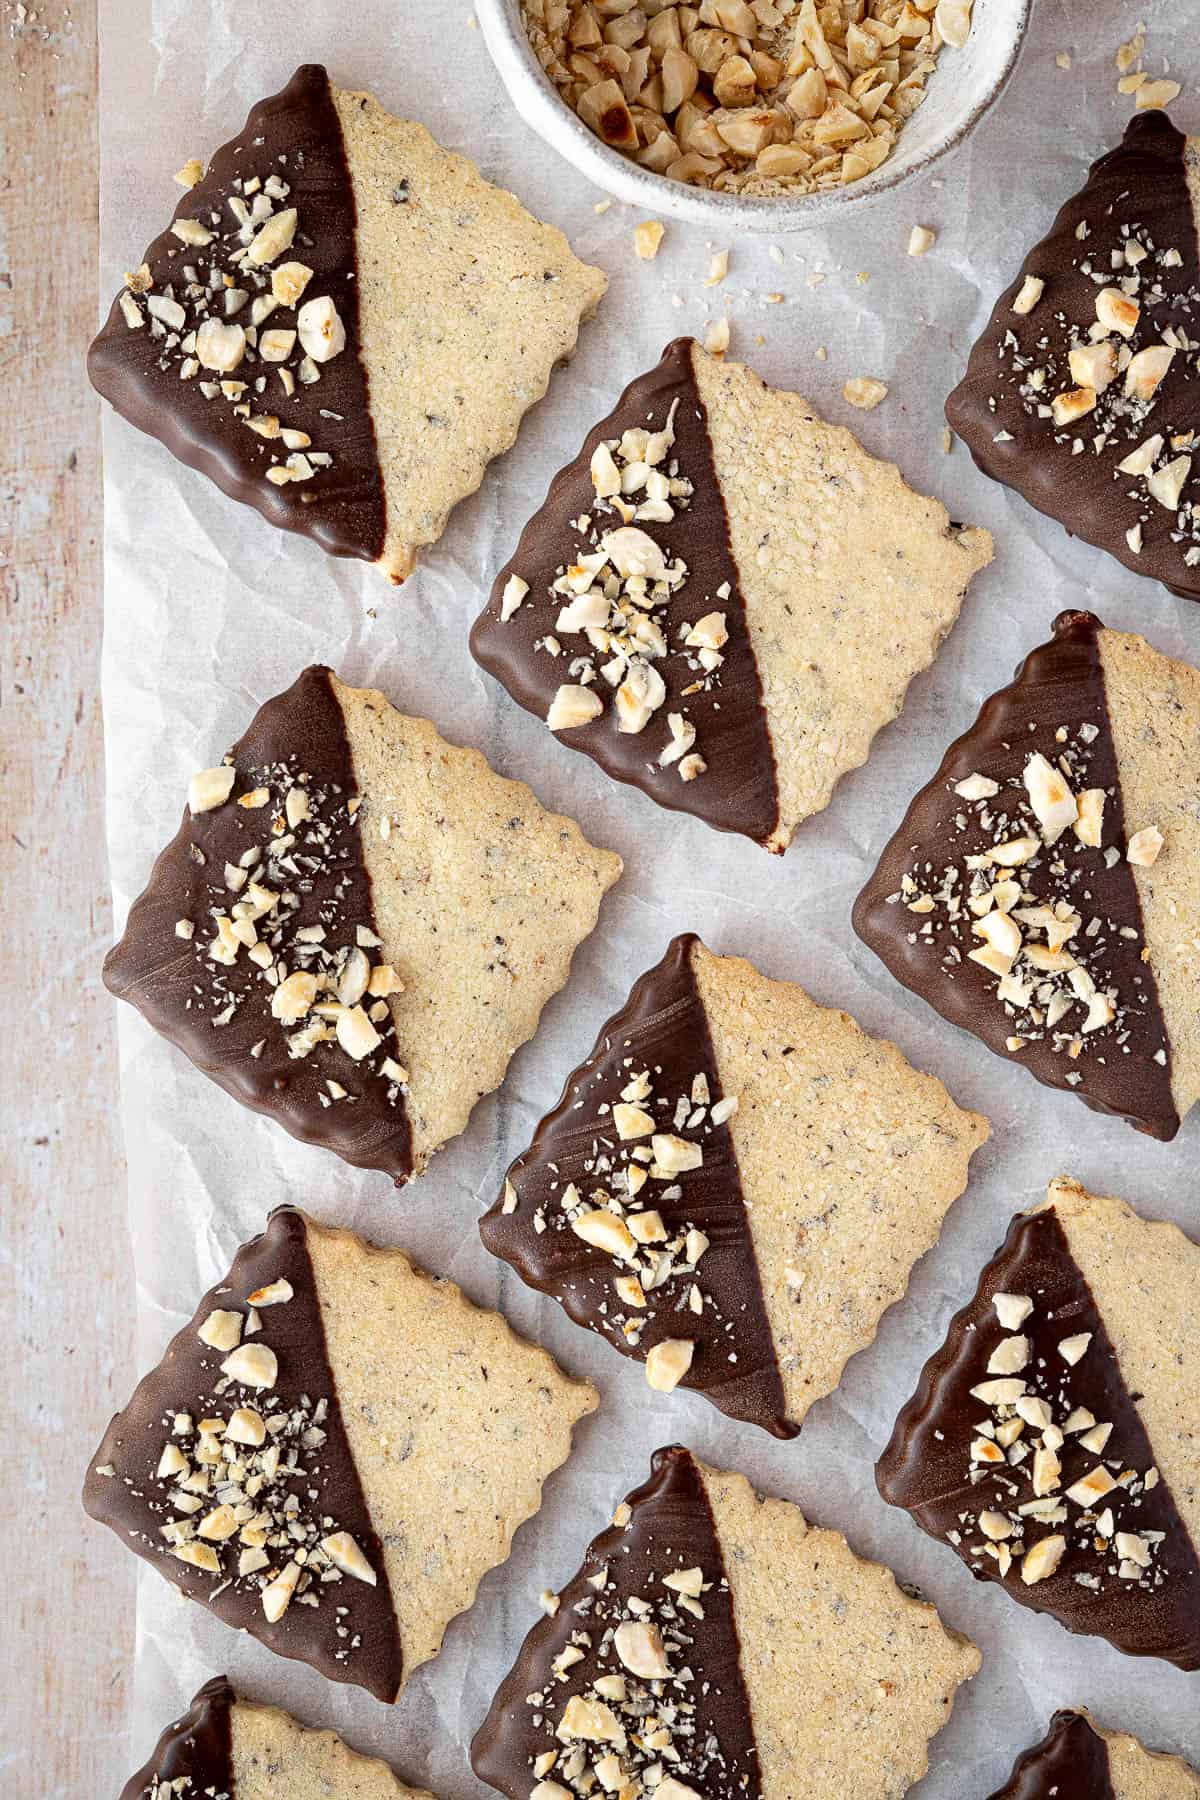 Vegan hazelnut shortbread on a sheet of baking parchment with a bowl of chopped hazelnuts.